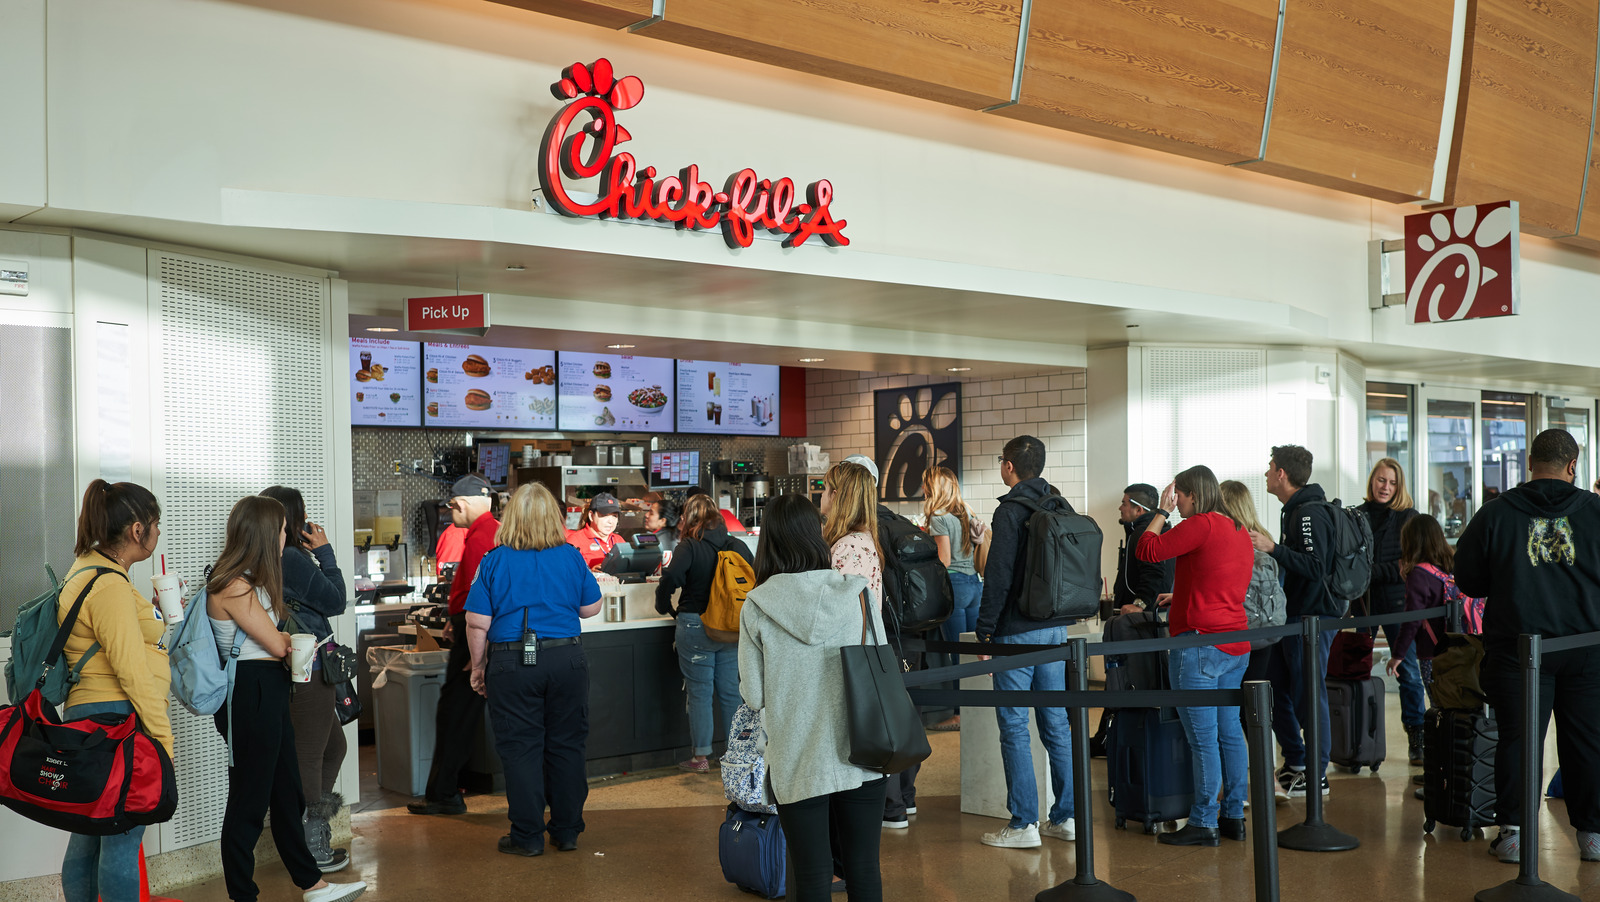 ChickFilA Employees Are Sharing How They Deal With Workplace Stress